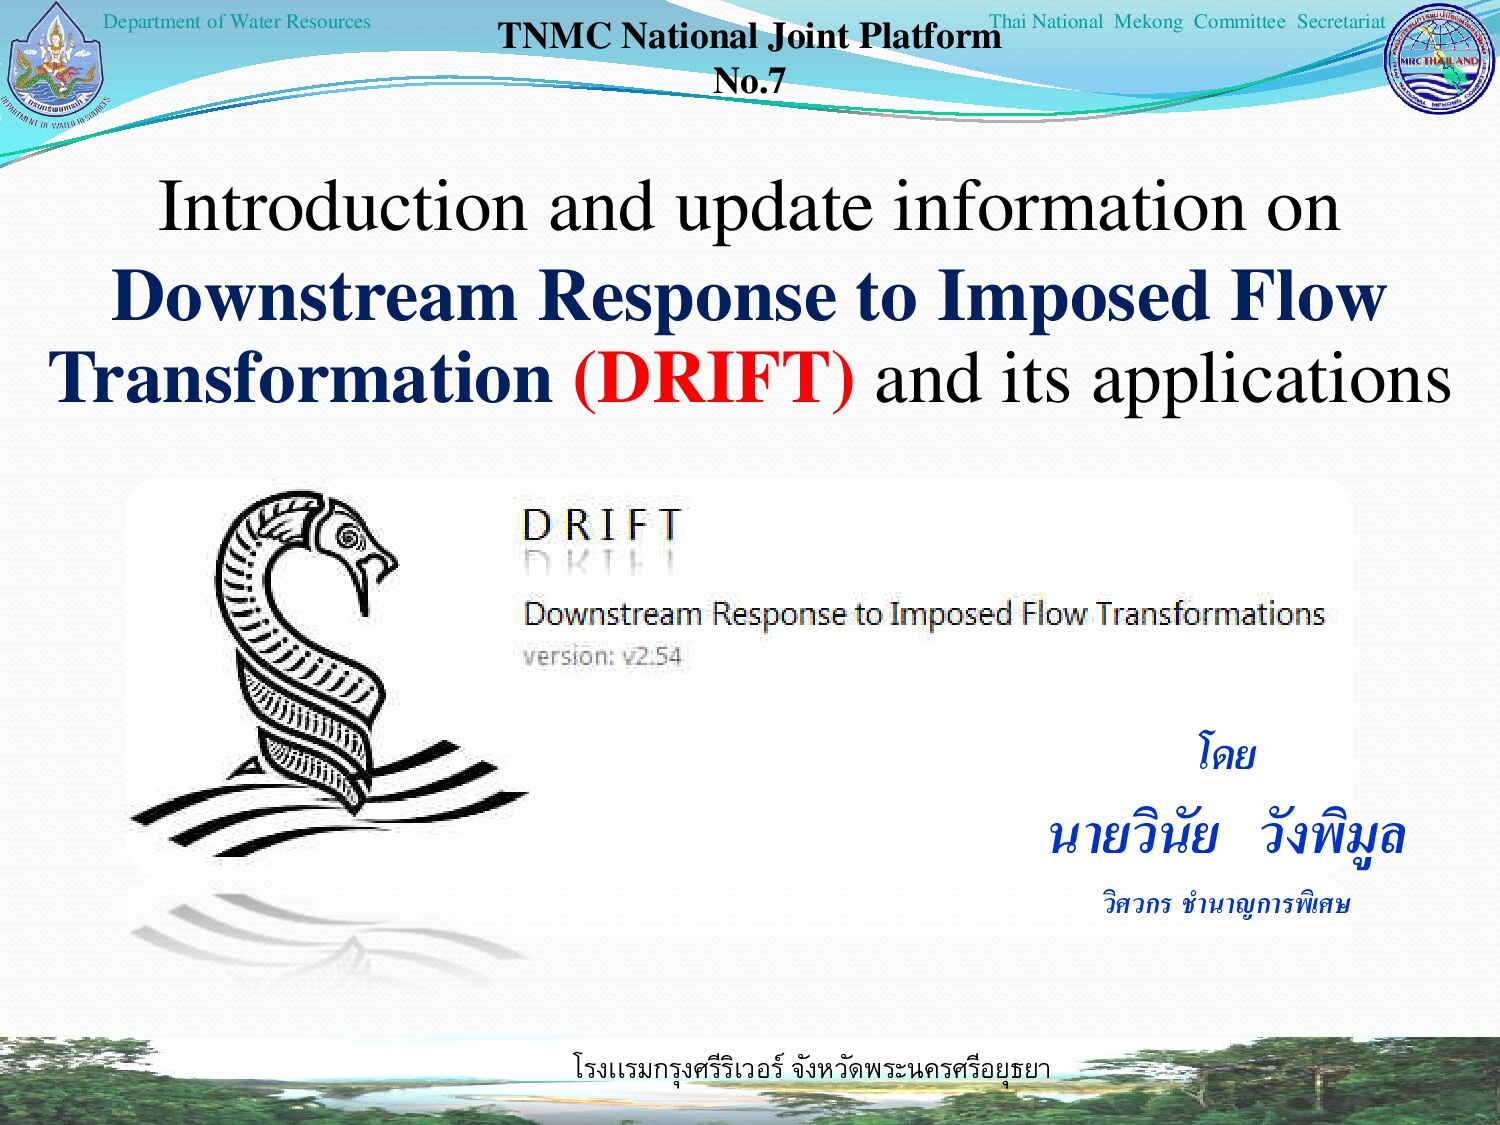 Introduction and update information on Downstream Response to Imposed Flow Transformation (DRIFT)